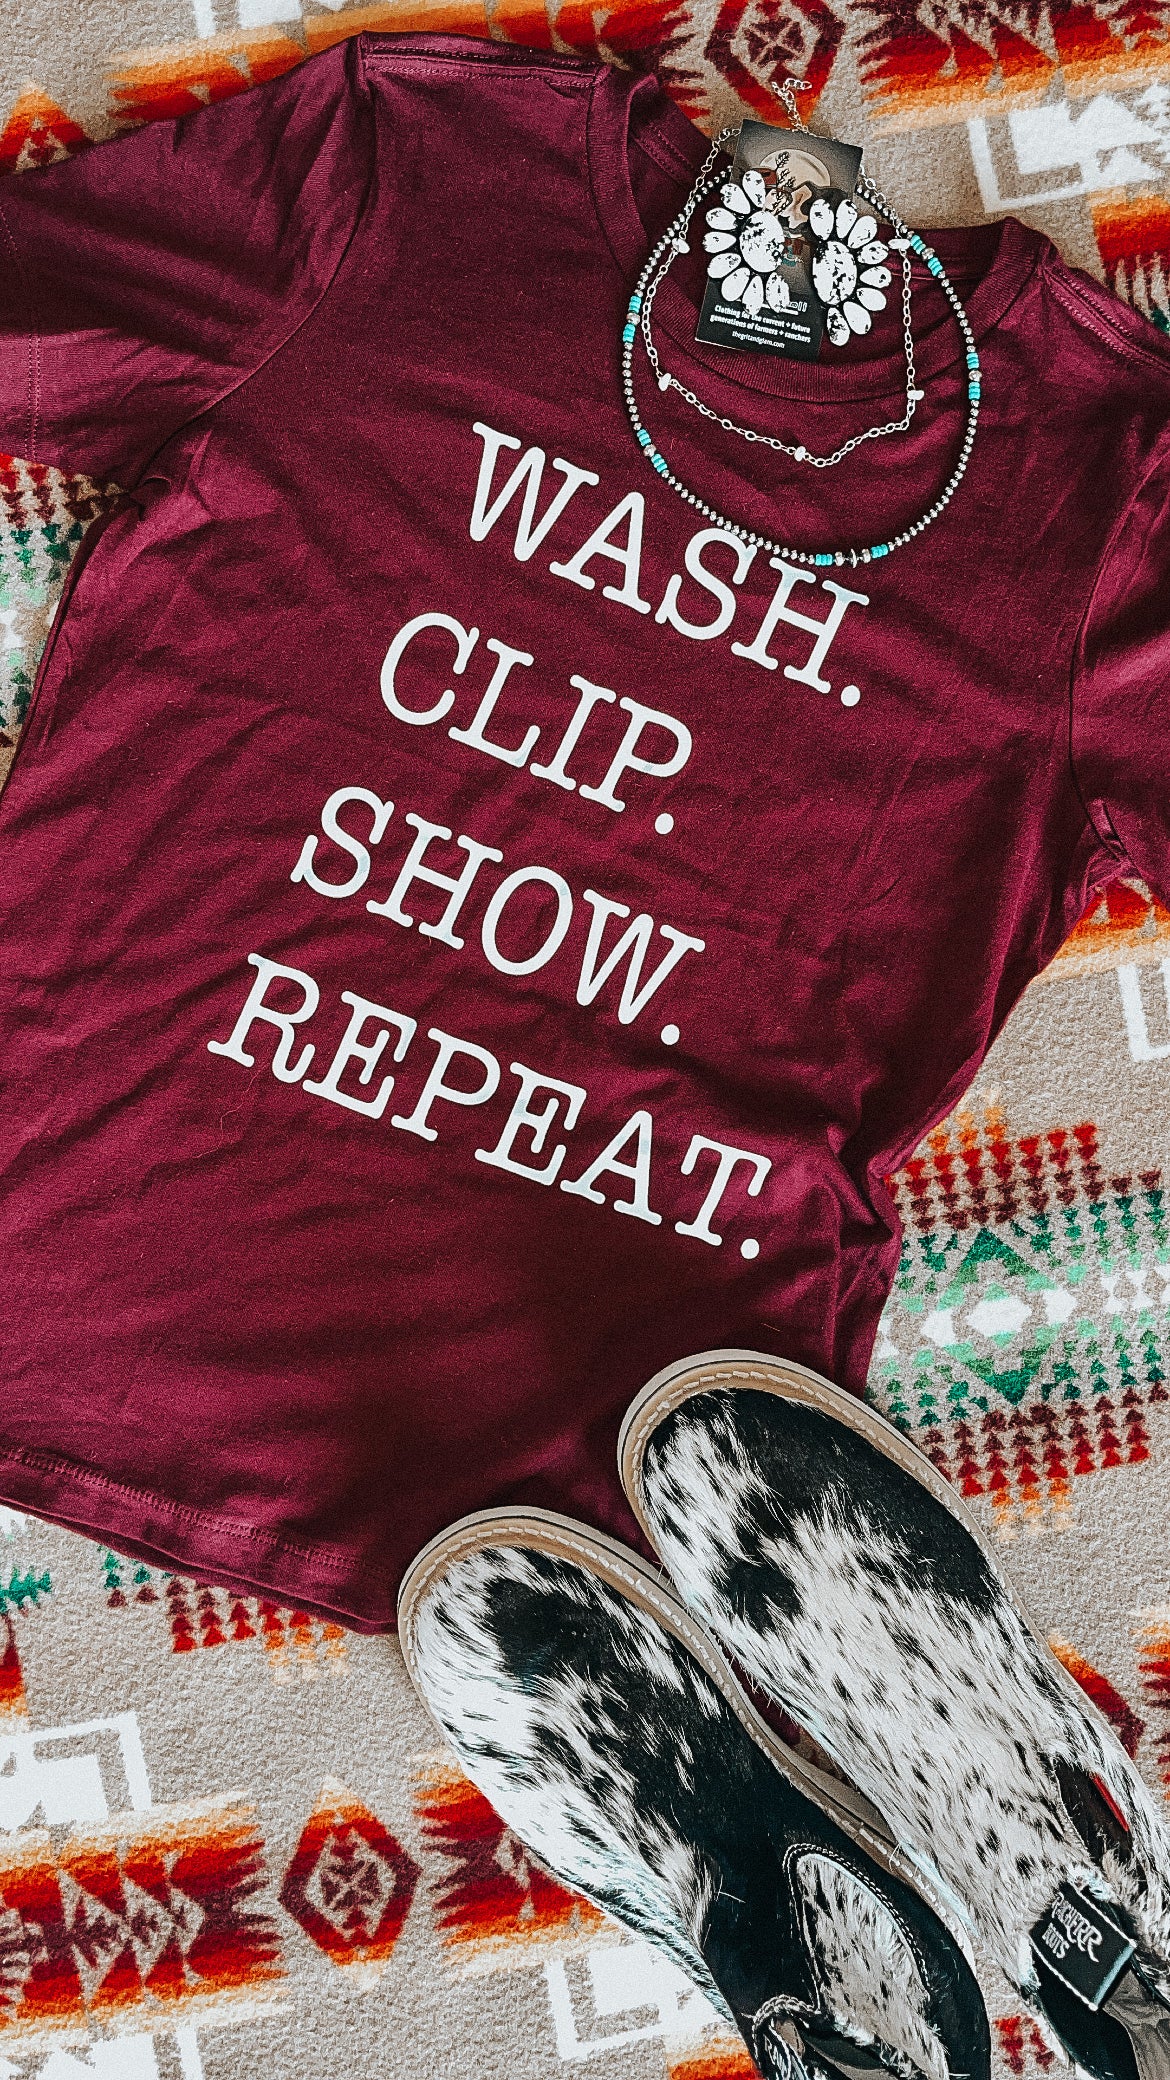 the Wash.Clip.Show.Repeat ladies tee